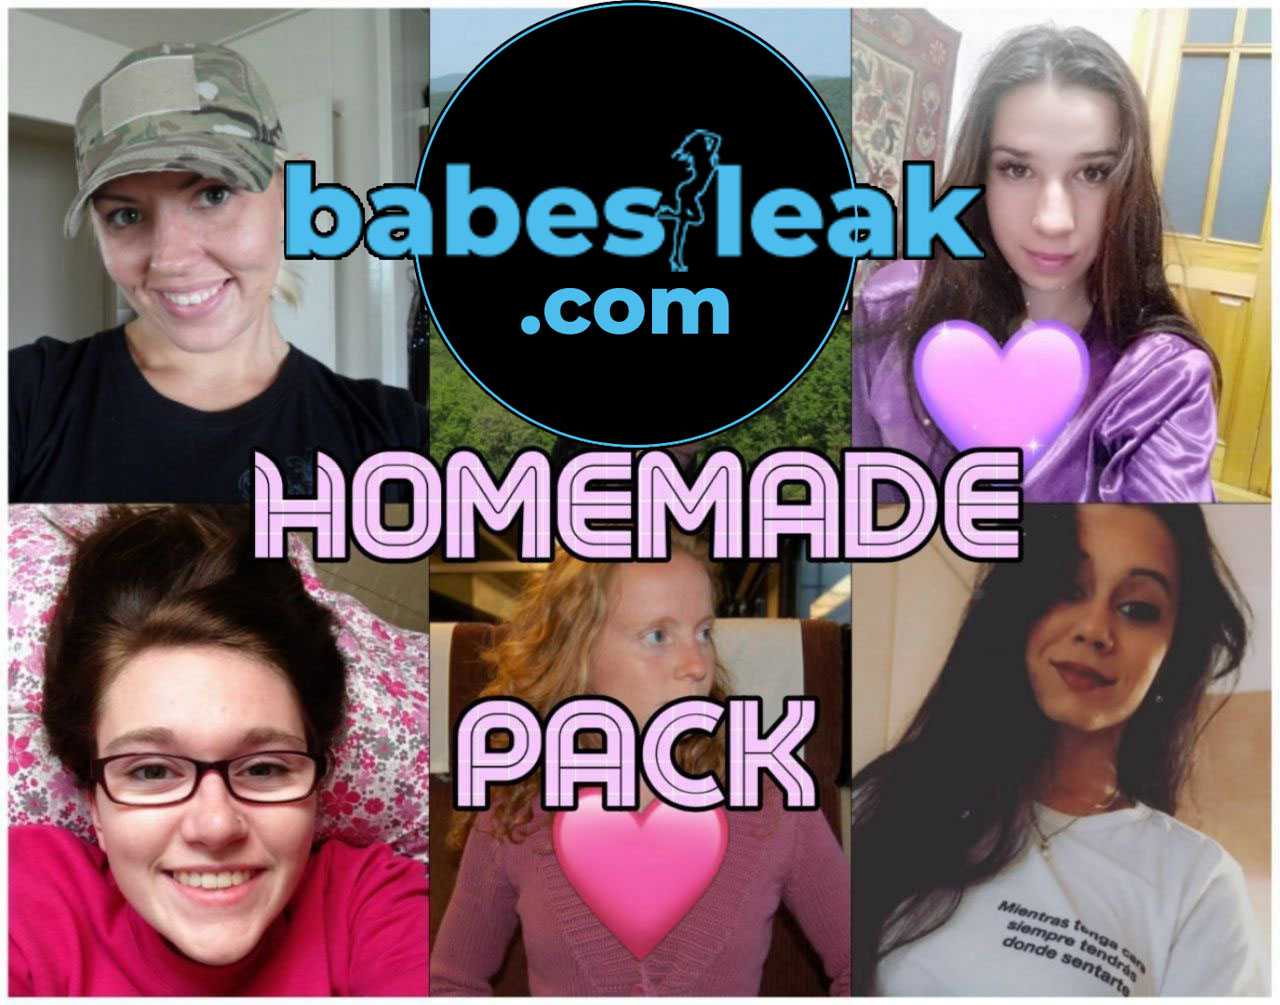 10 Albums Homemade Statewins Leak Pack Hm037 Onlyfans Leaks Snapchat Leaks Statewins Leaks 6582